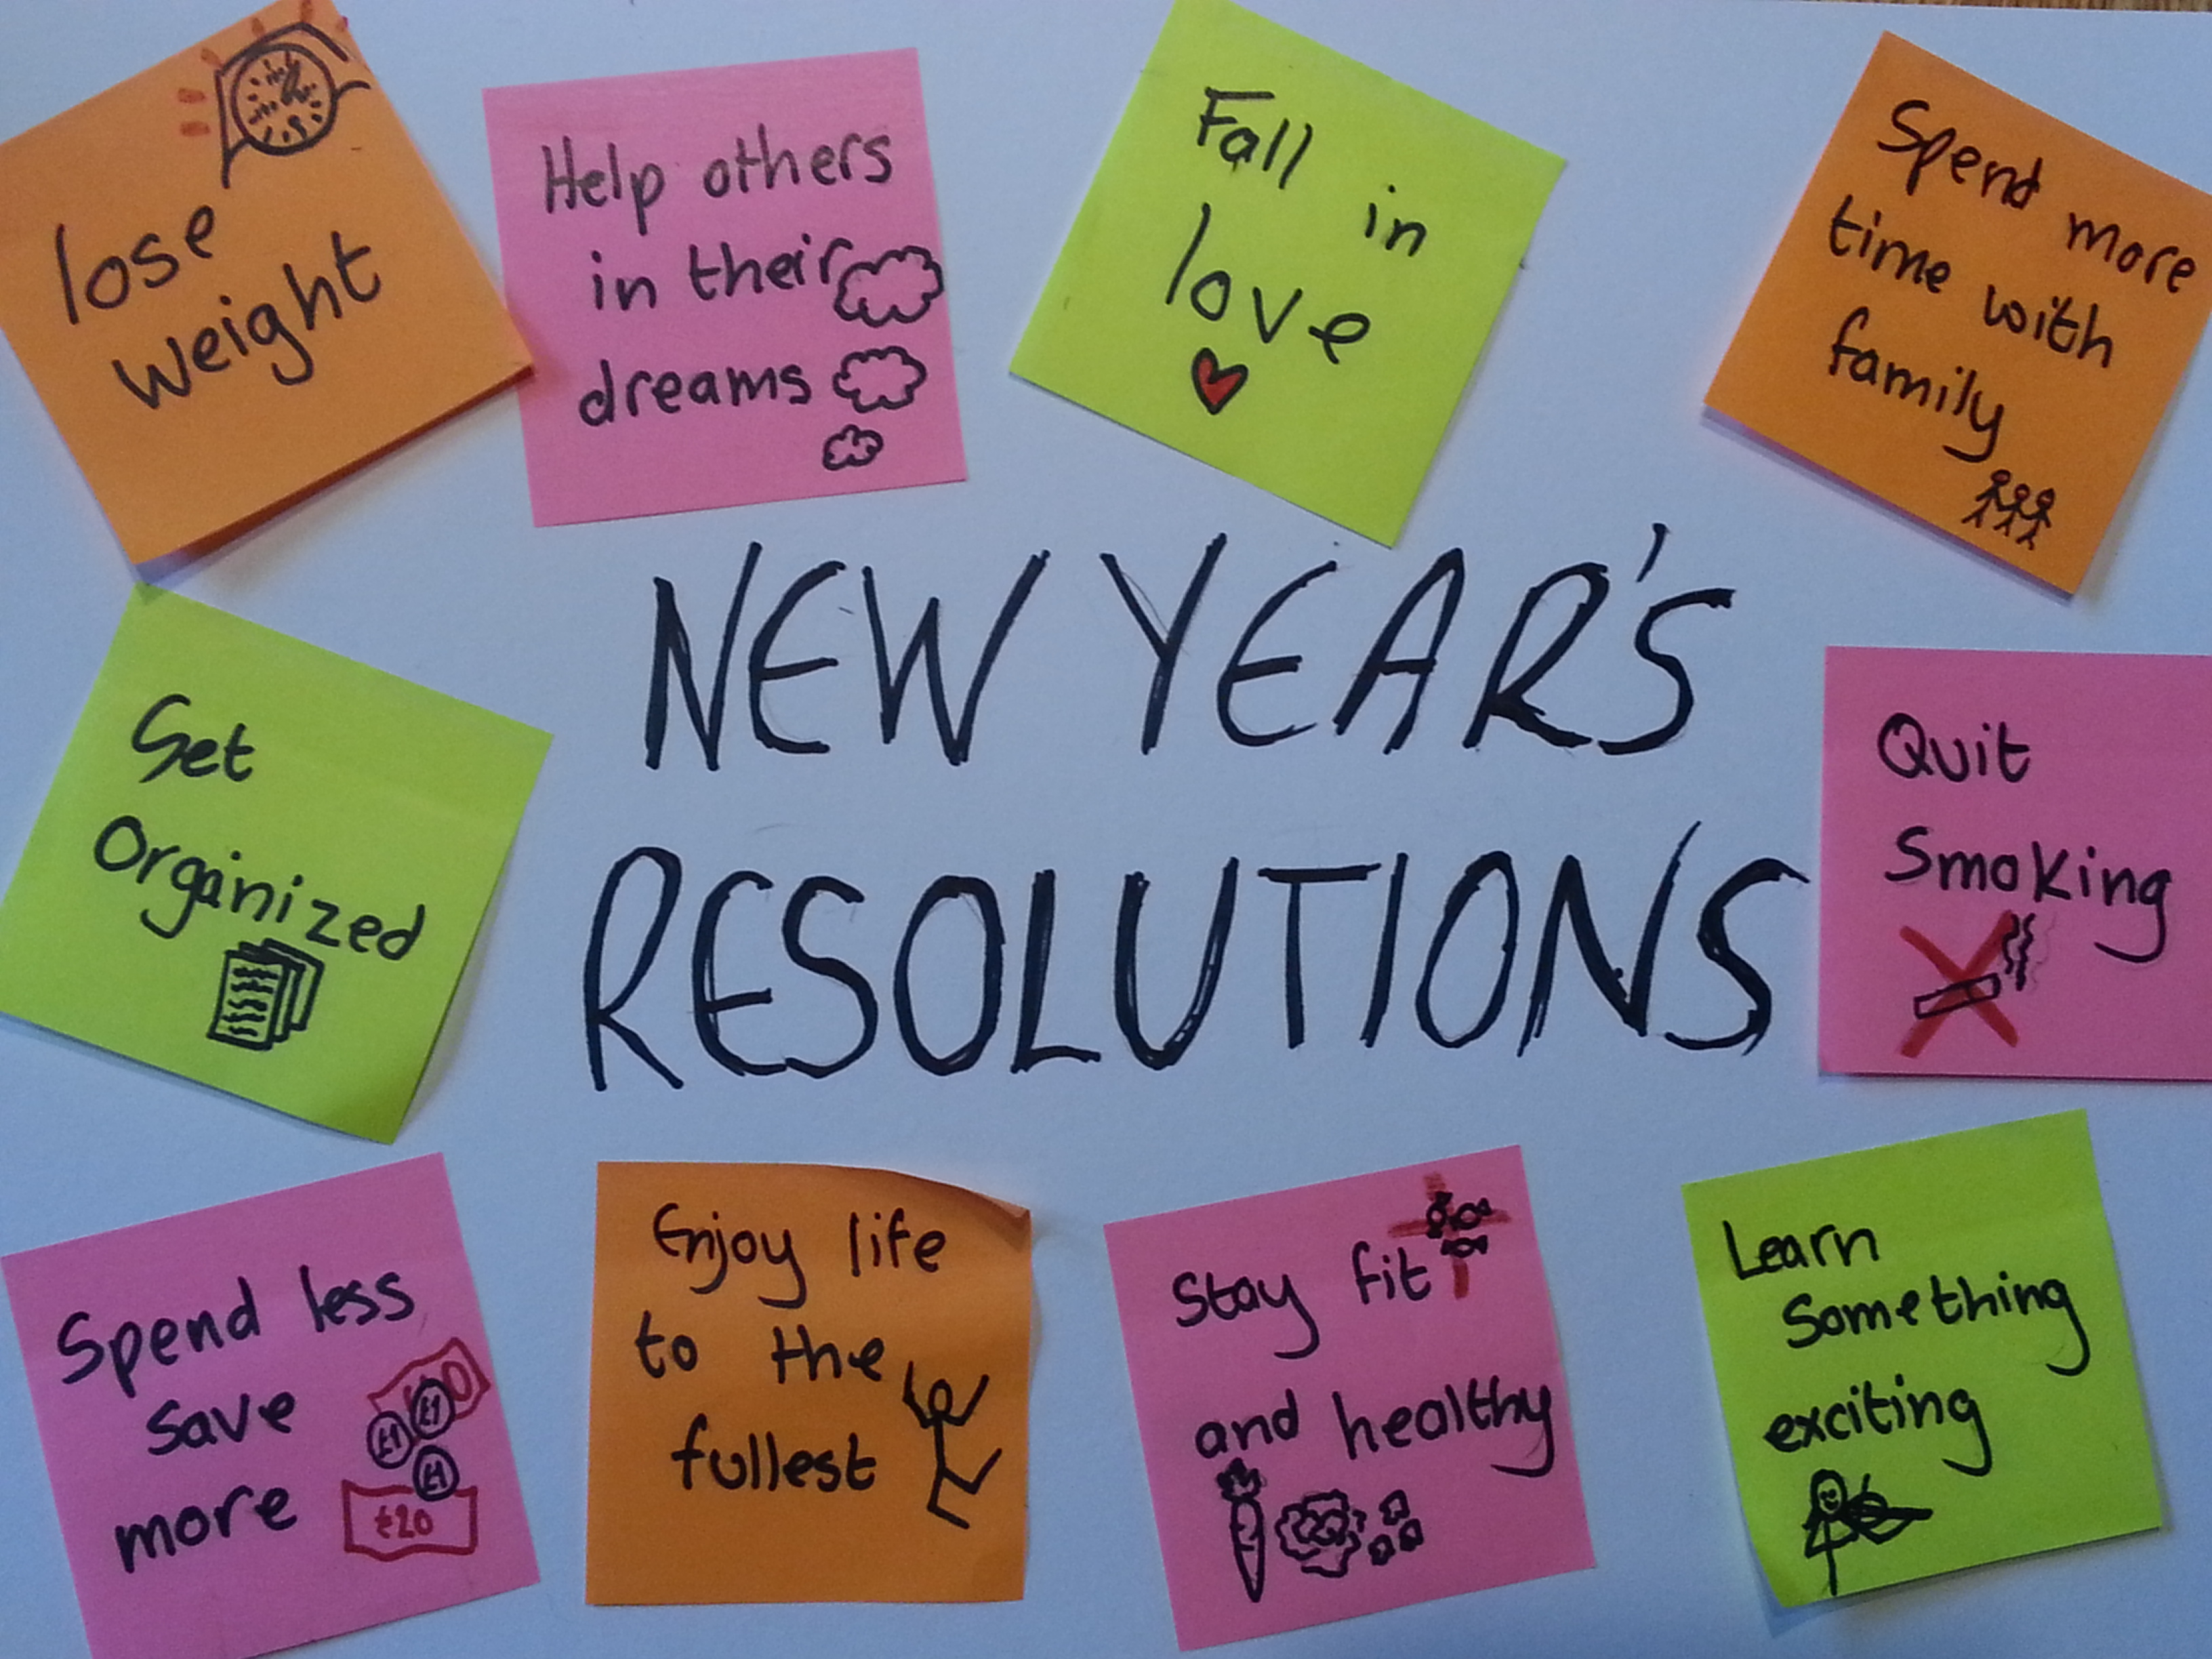 5 New Year's Resolutions Worth Making and Keeping